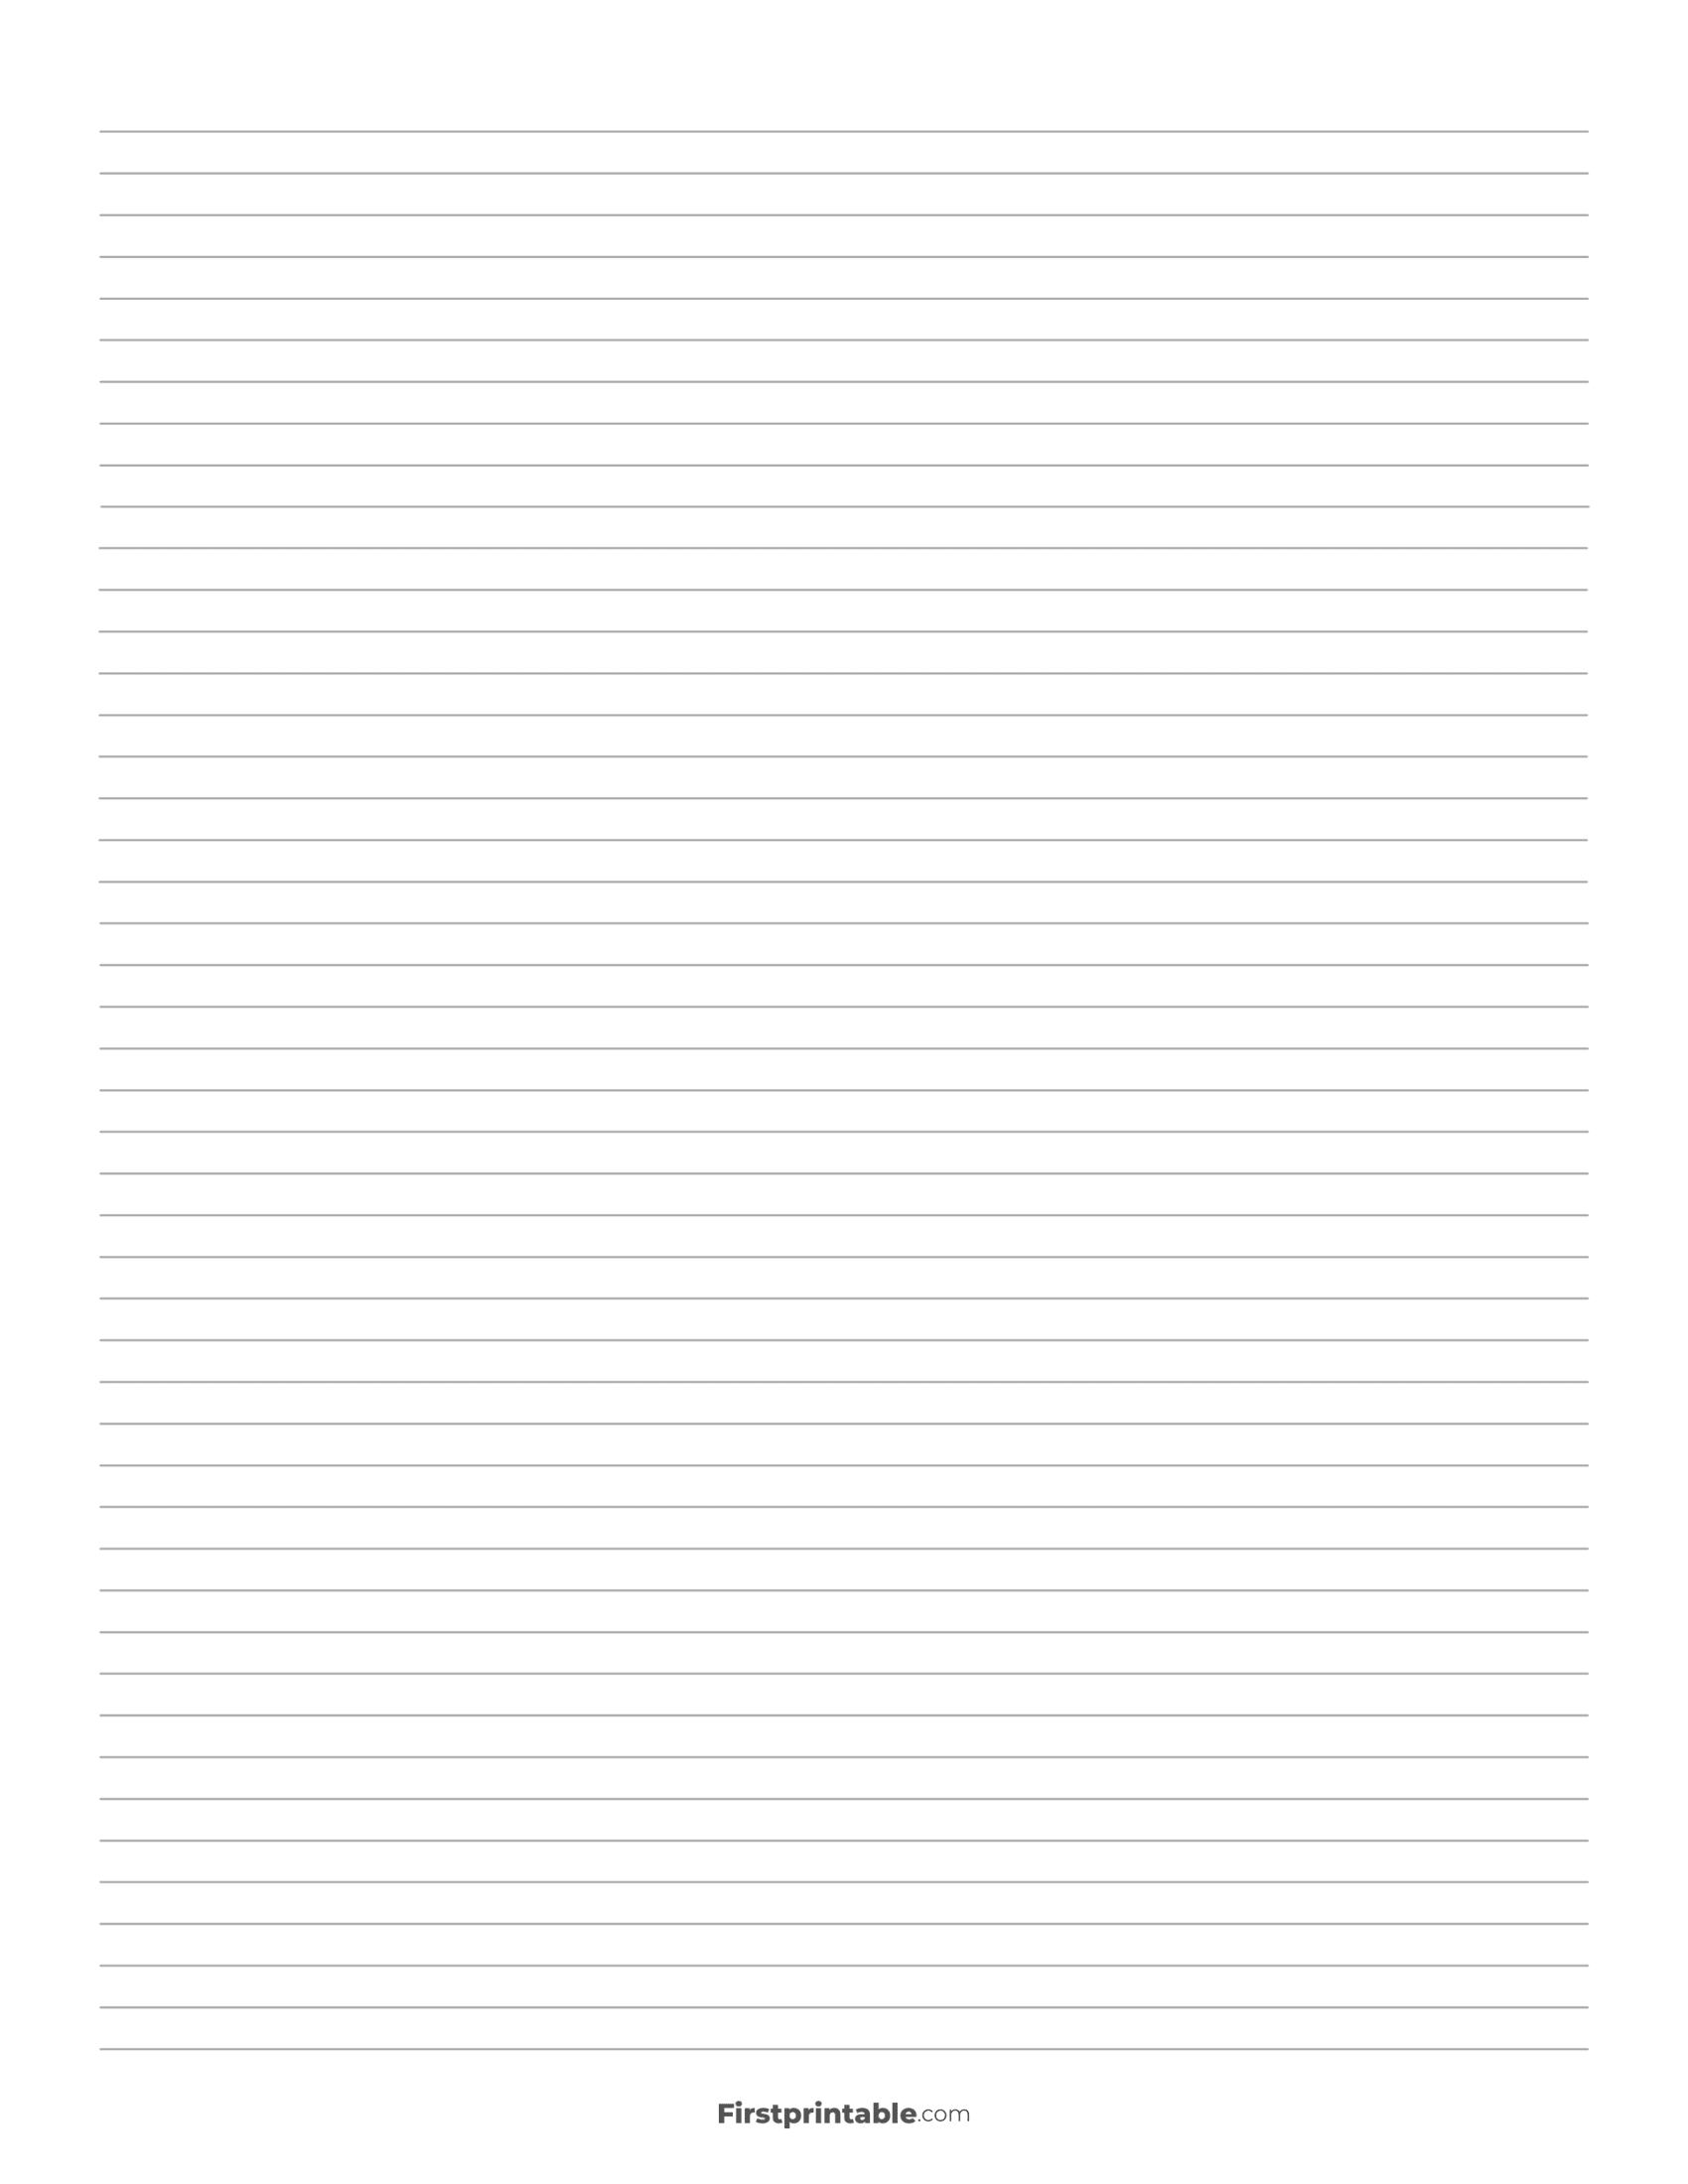 Printable Lined Paper Template - Ruled 5mm